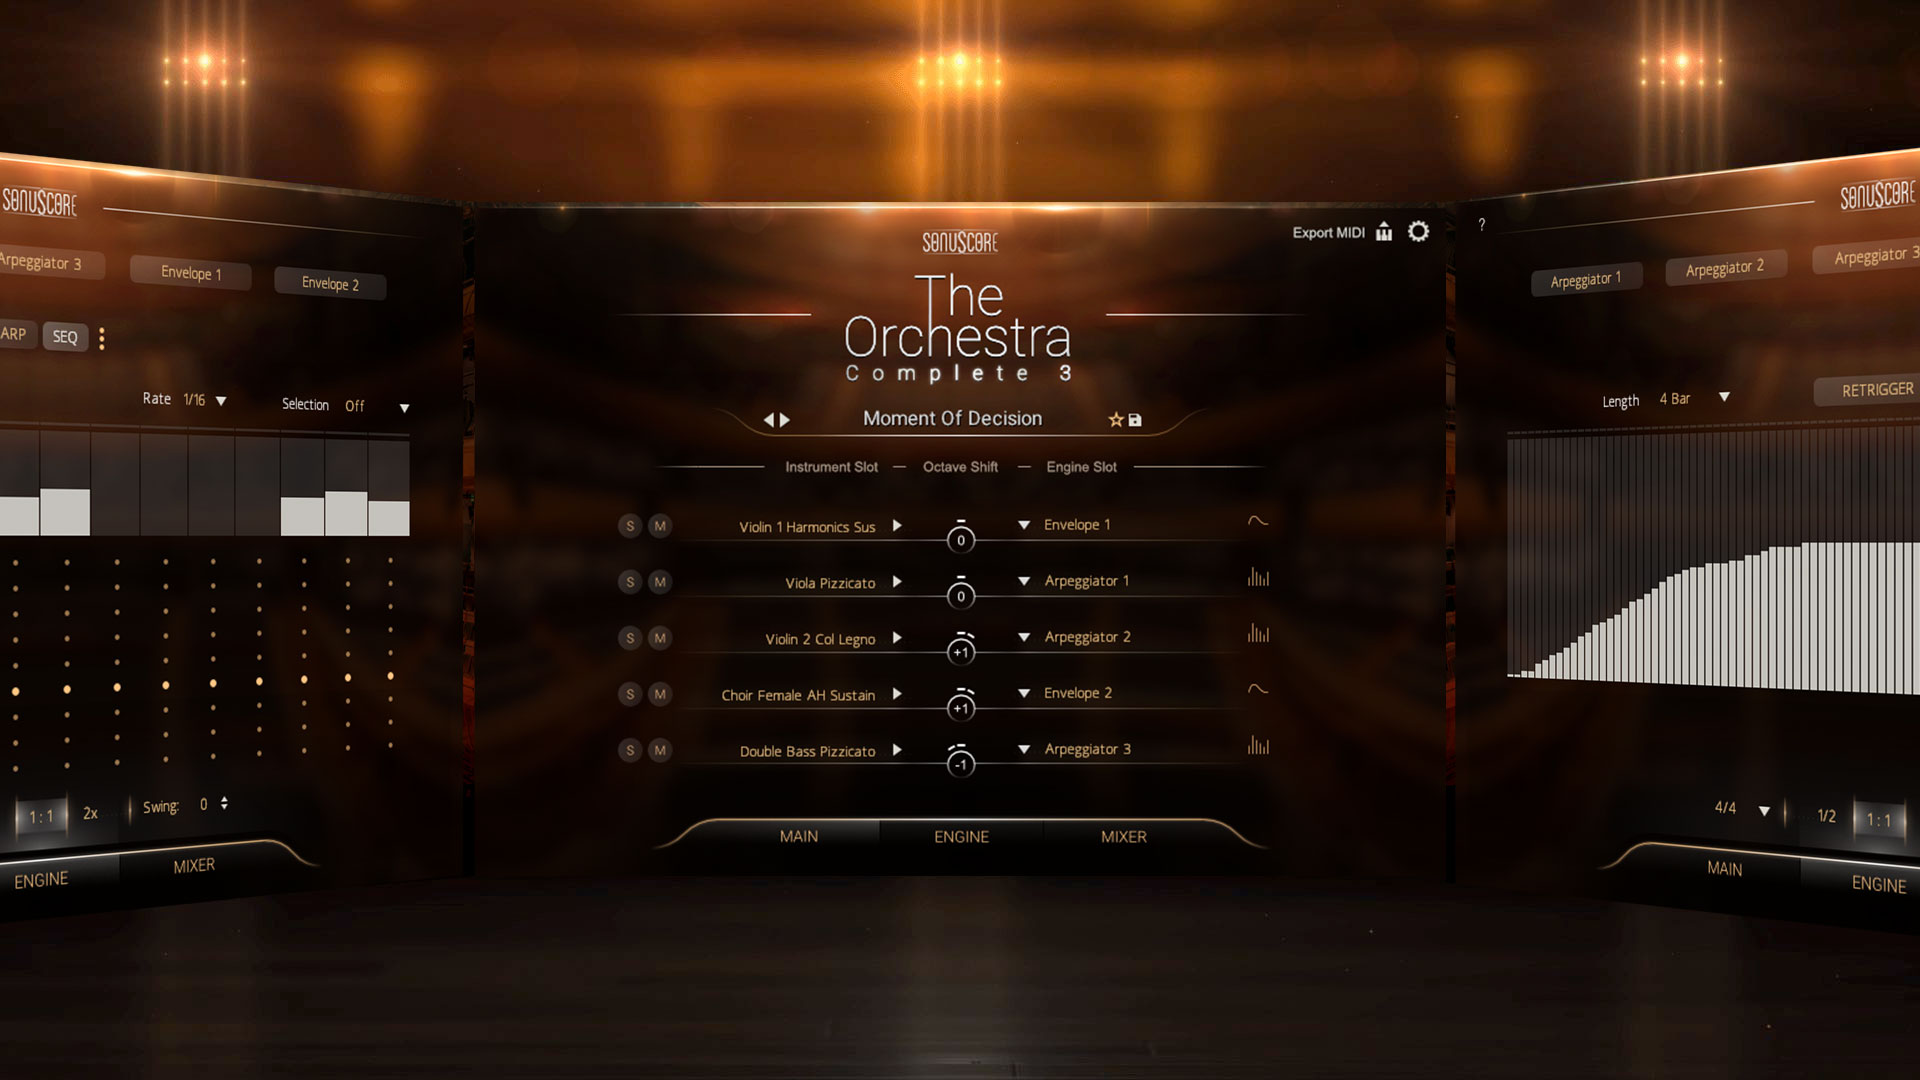 The orchestra complete. Sonuscore - the Orchestra complete 3. Orchestral Essentials. Ыщтгысщку Orchestra 3. Orchestra 3d.